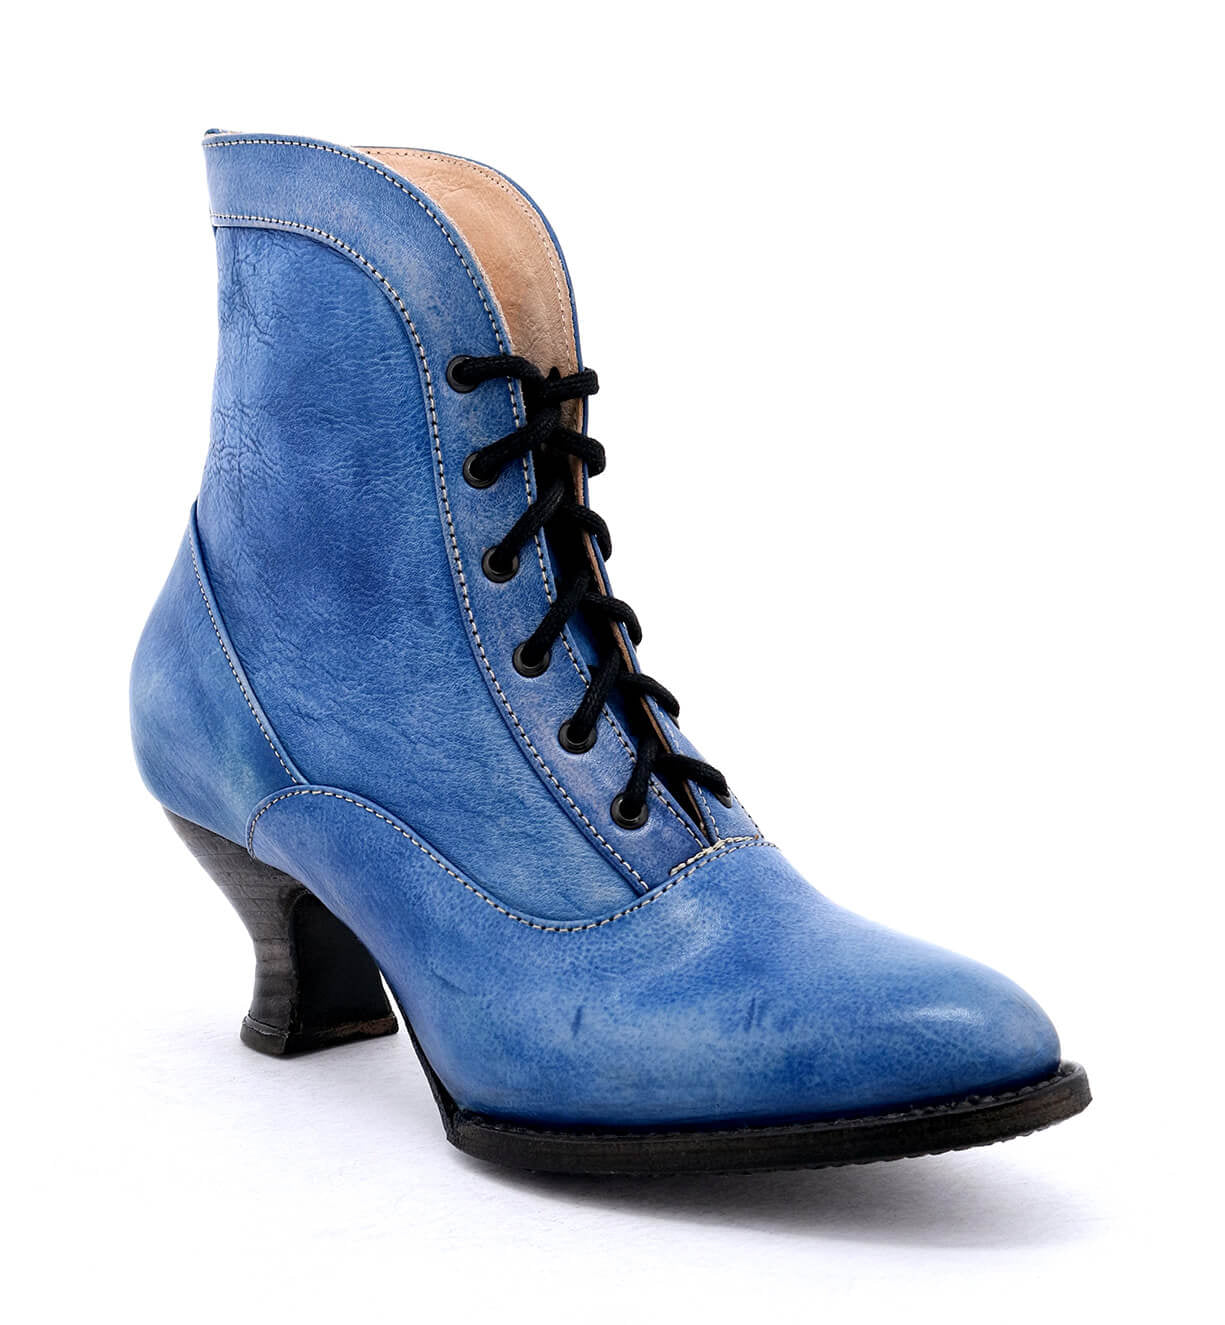 A handcrafted Jacquelyn by Oak Tree Farms women's blue leather ankle boot with a leather welted outsole.